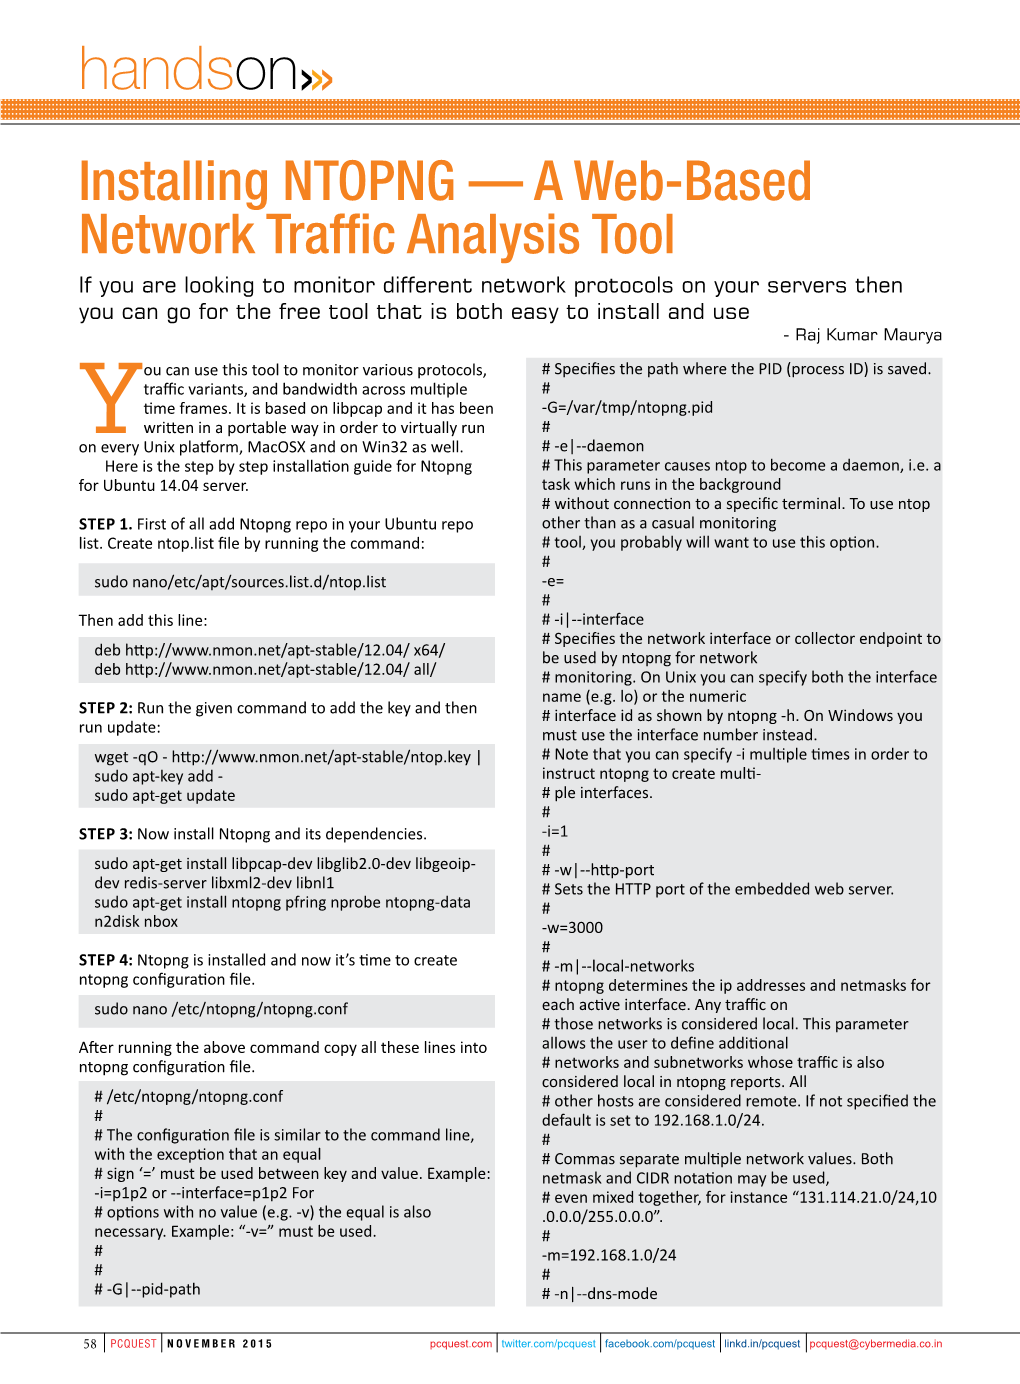 Installing NTOPNG-A Web-Based Network Traffic Analysis Tool